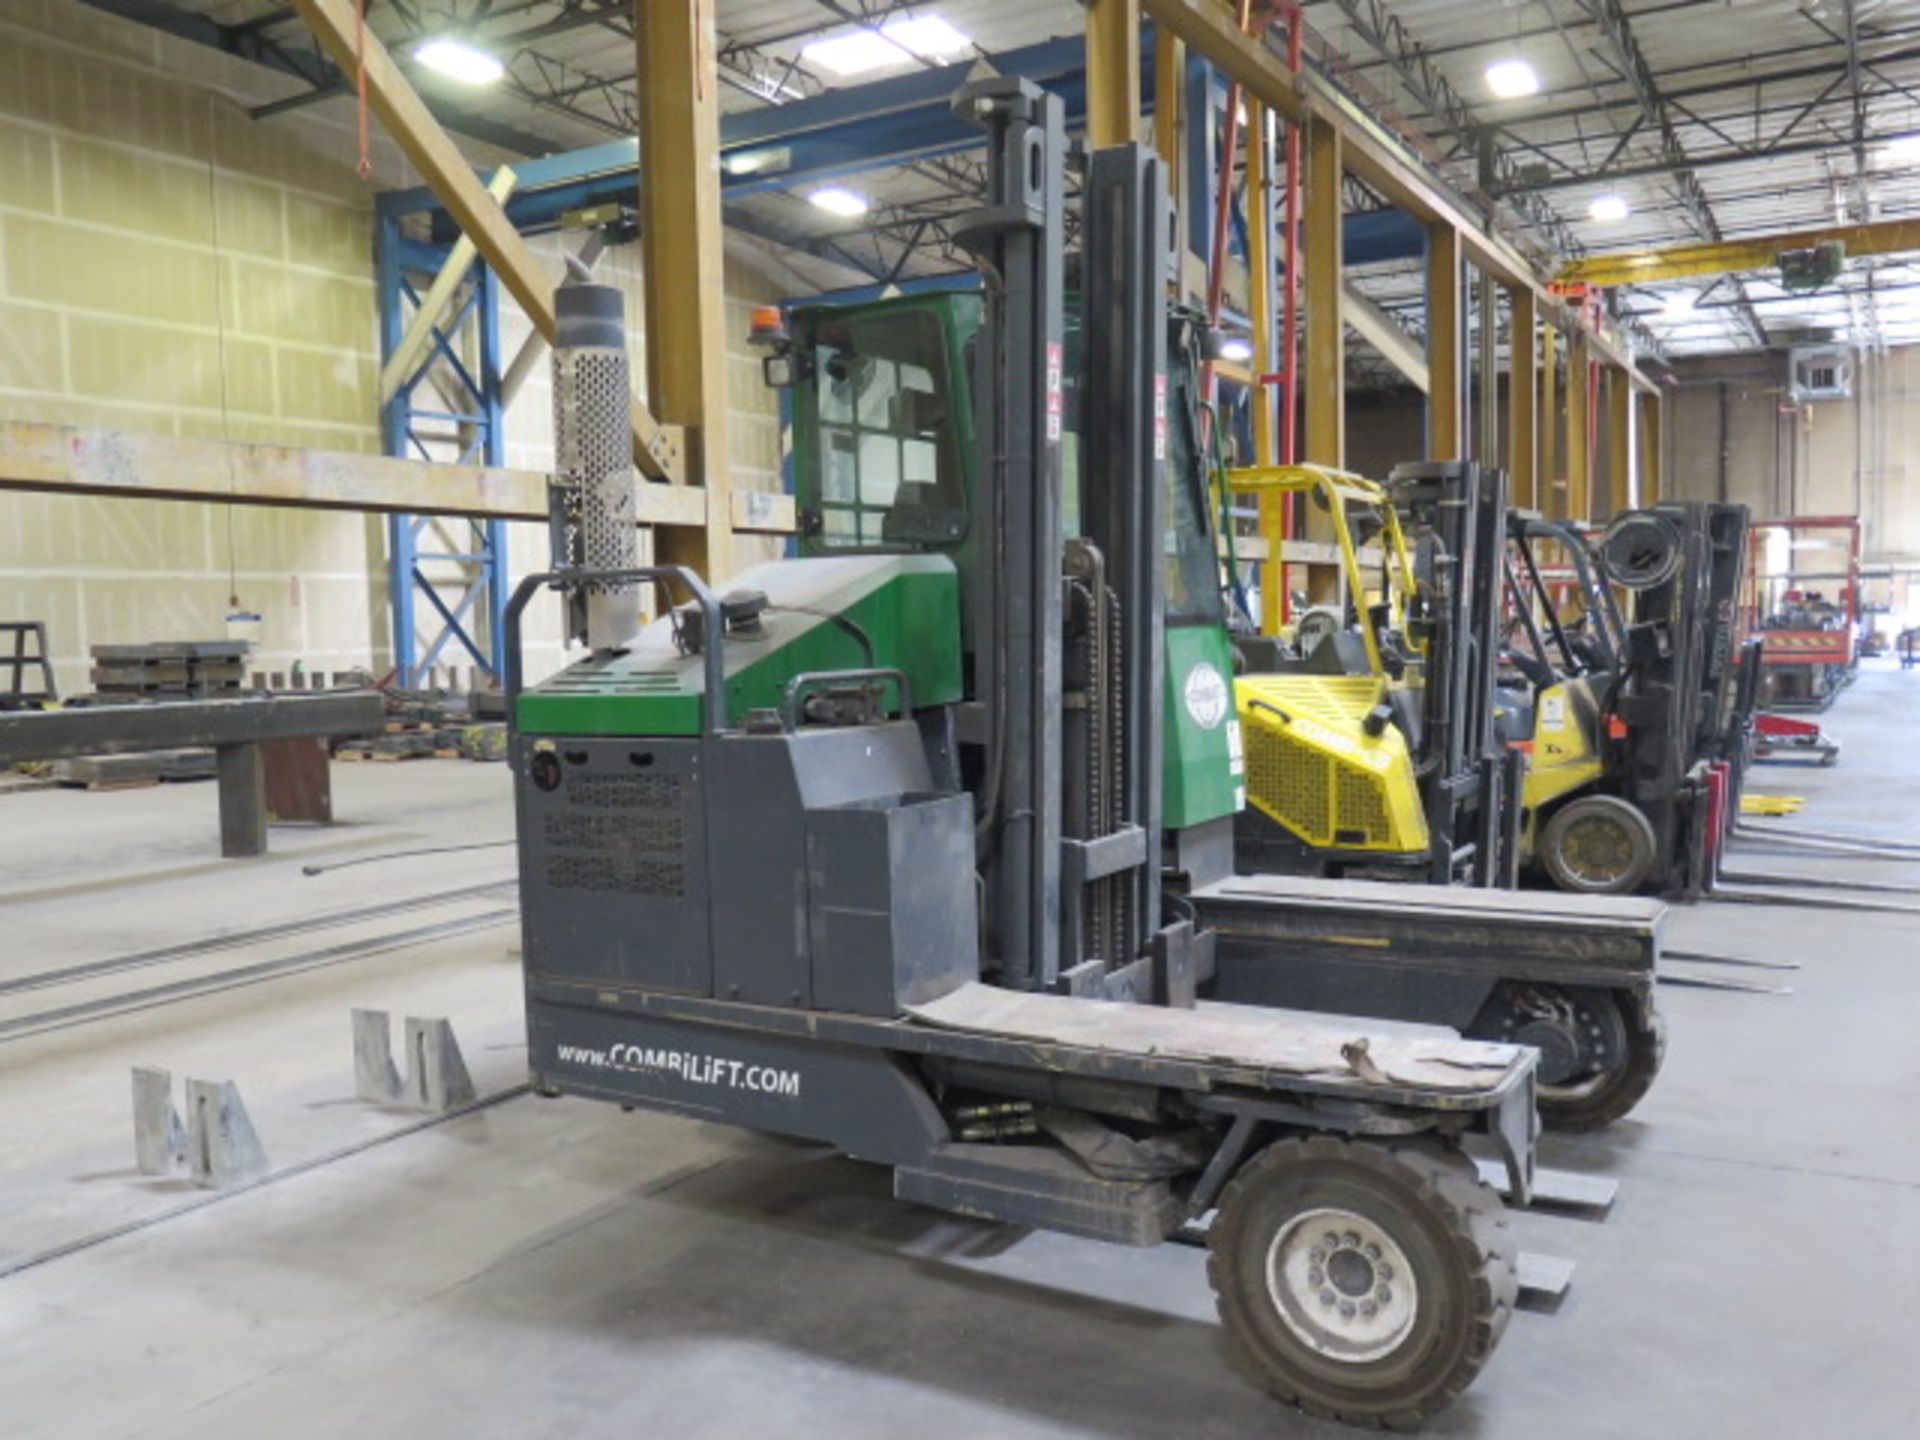 2017 CombiLift C10000XL 10,000 Lb Cap LPG Comb Forklift s/n 34893 w/ Multi-Directional, SOLD AS IS - Image 3 of 17